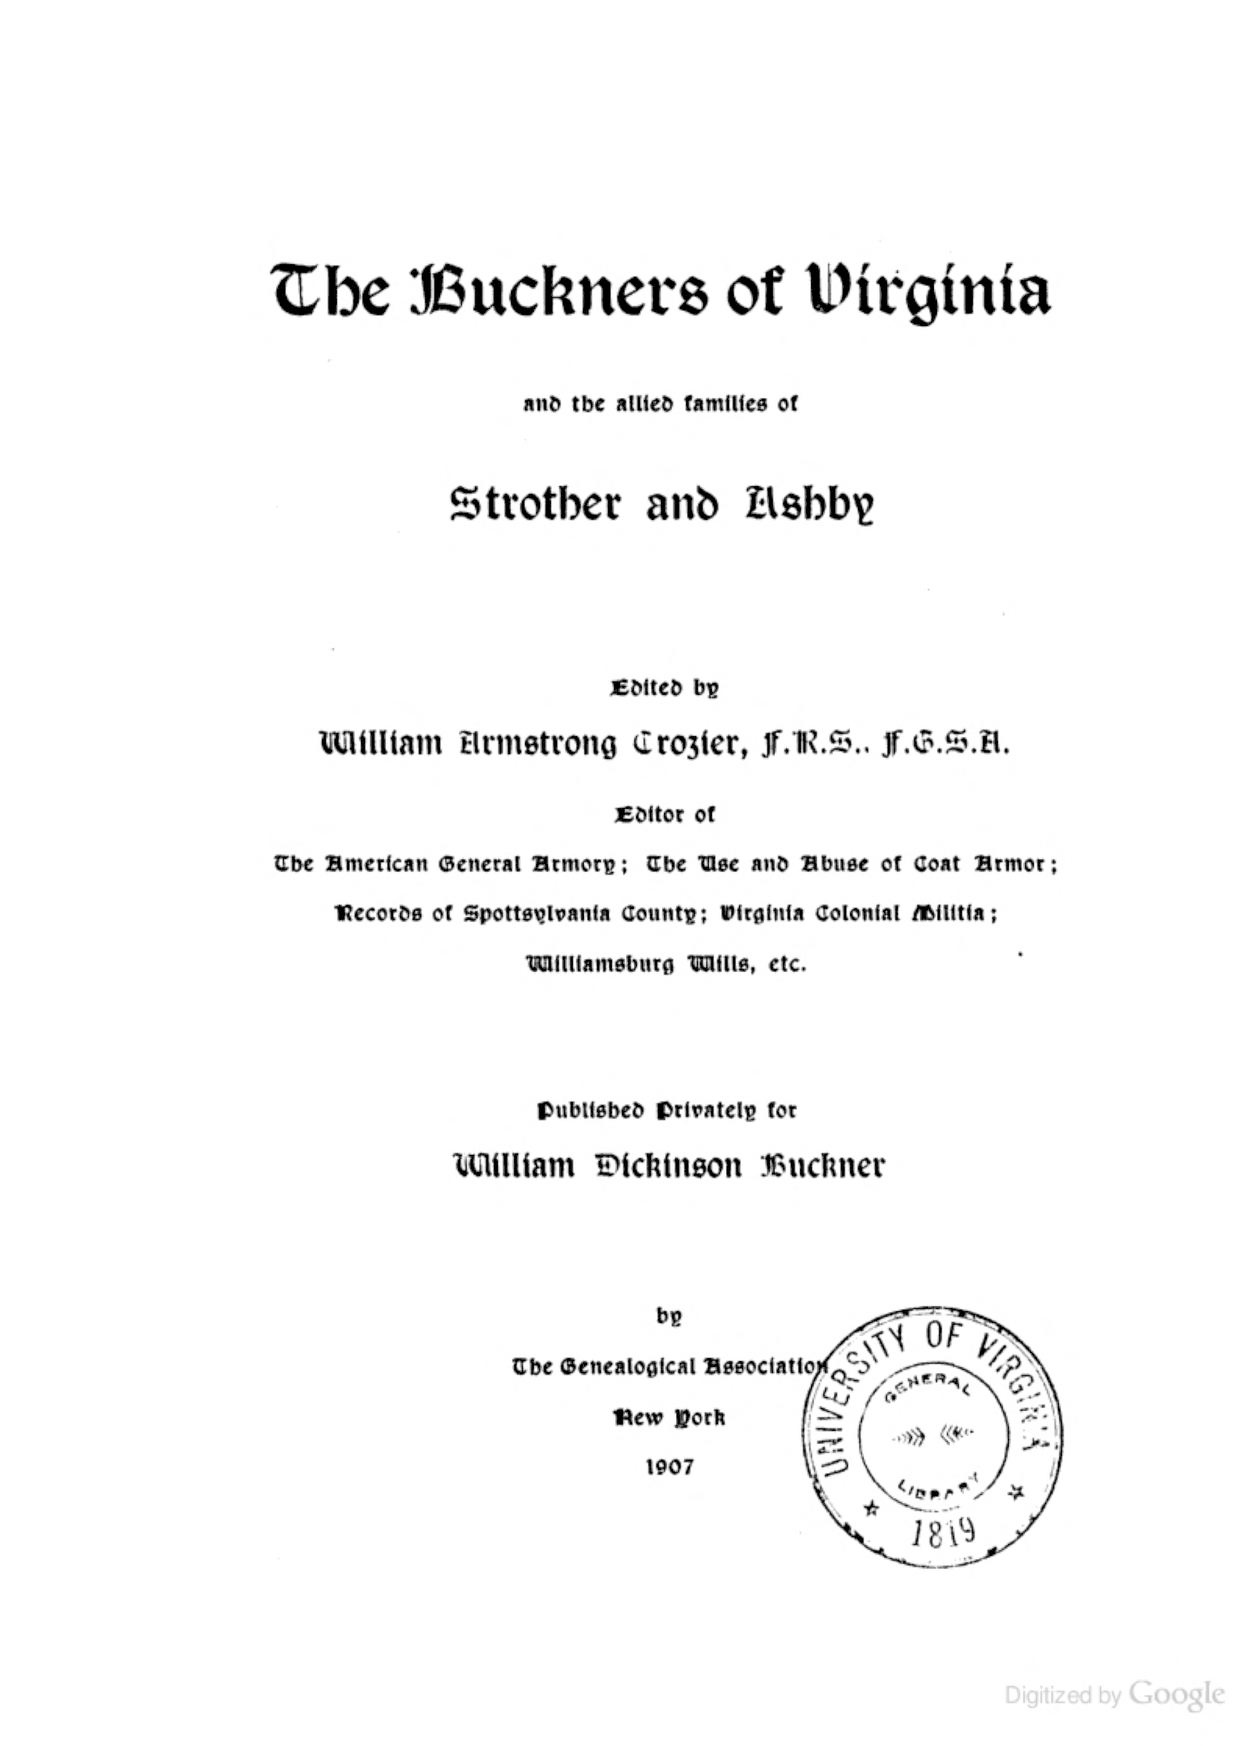 The Buckners of Virginia : and the allied families of Strother and Ashby